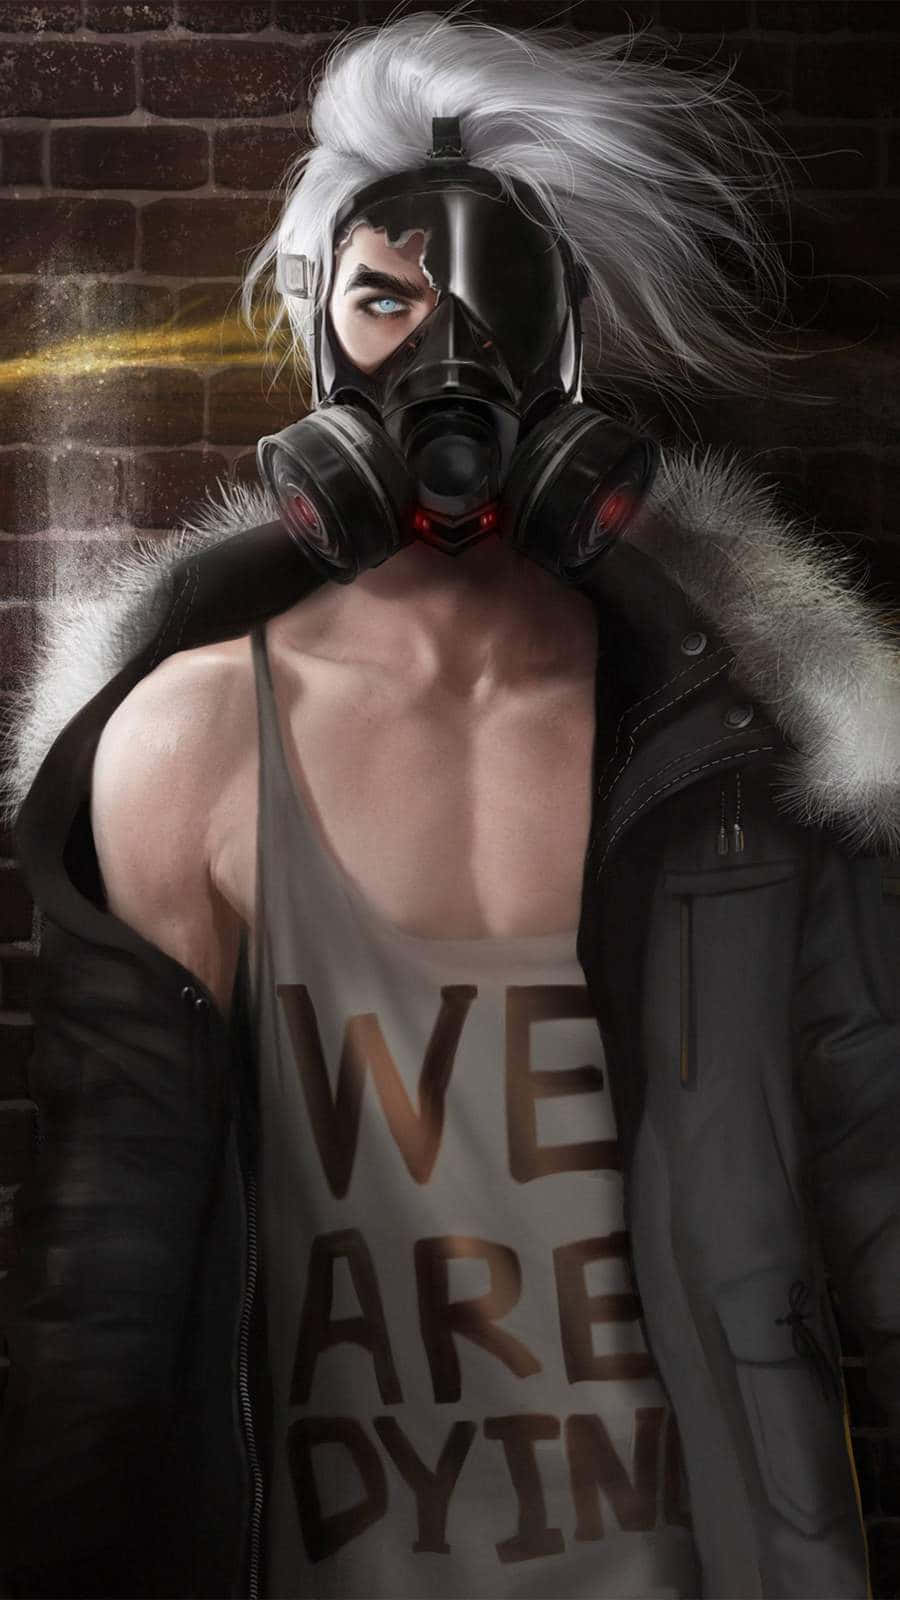 Intense Portrait Of A Muscular Young Man Wearing A Gas Mask Background